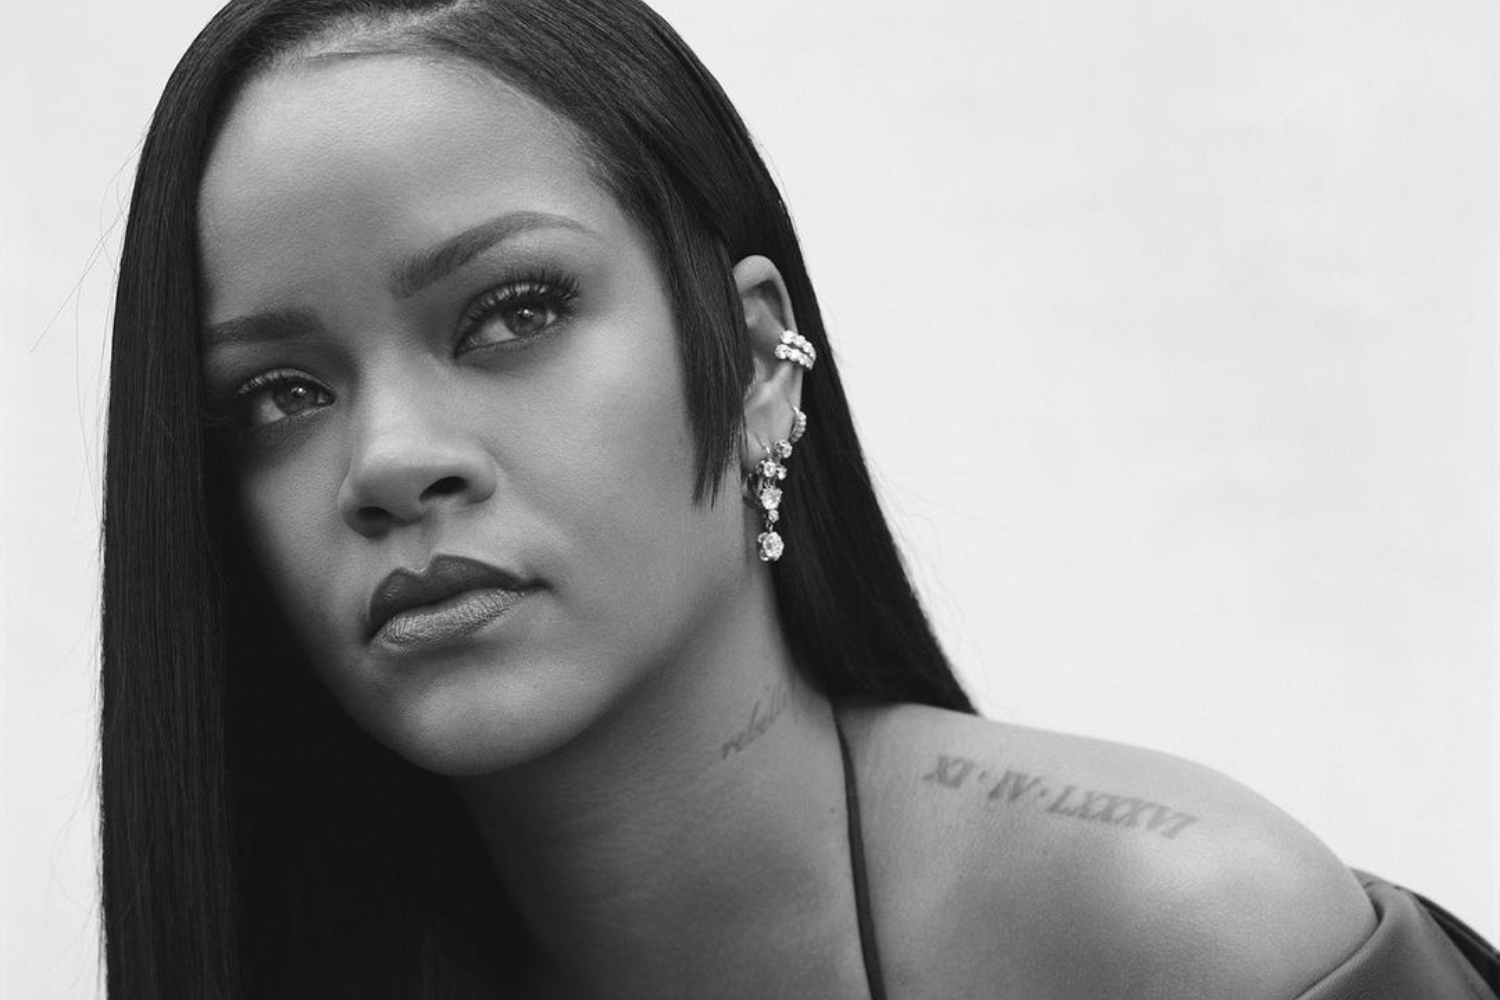 Singer and businesswoman Rihanna turns 36 today